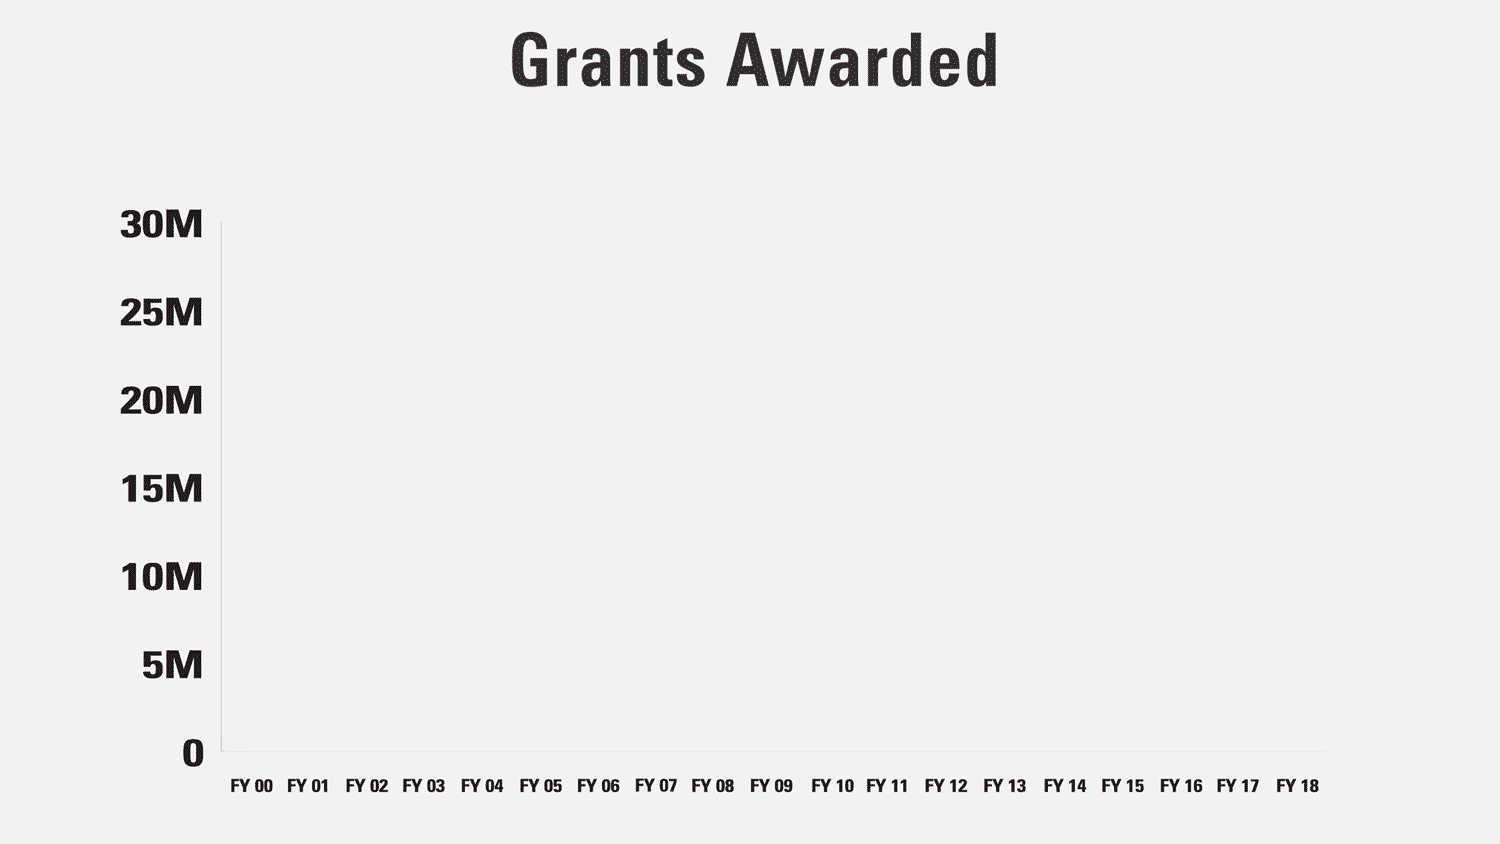 NC State College of Education faculty were awarded their most grants in terms of dollar amount in 2017-2018.